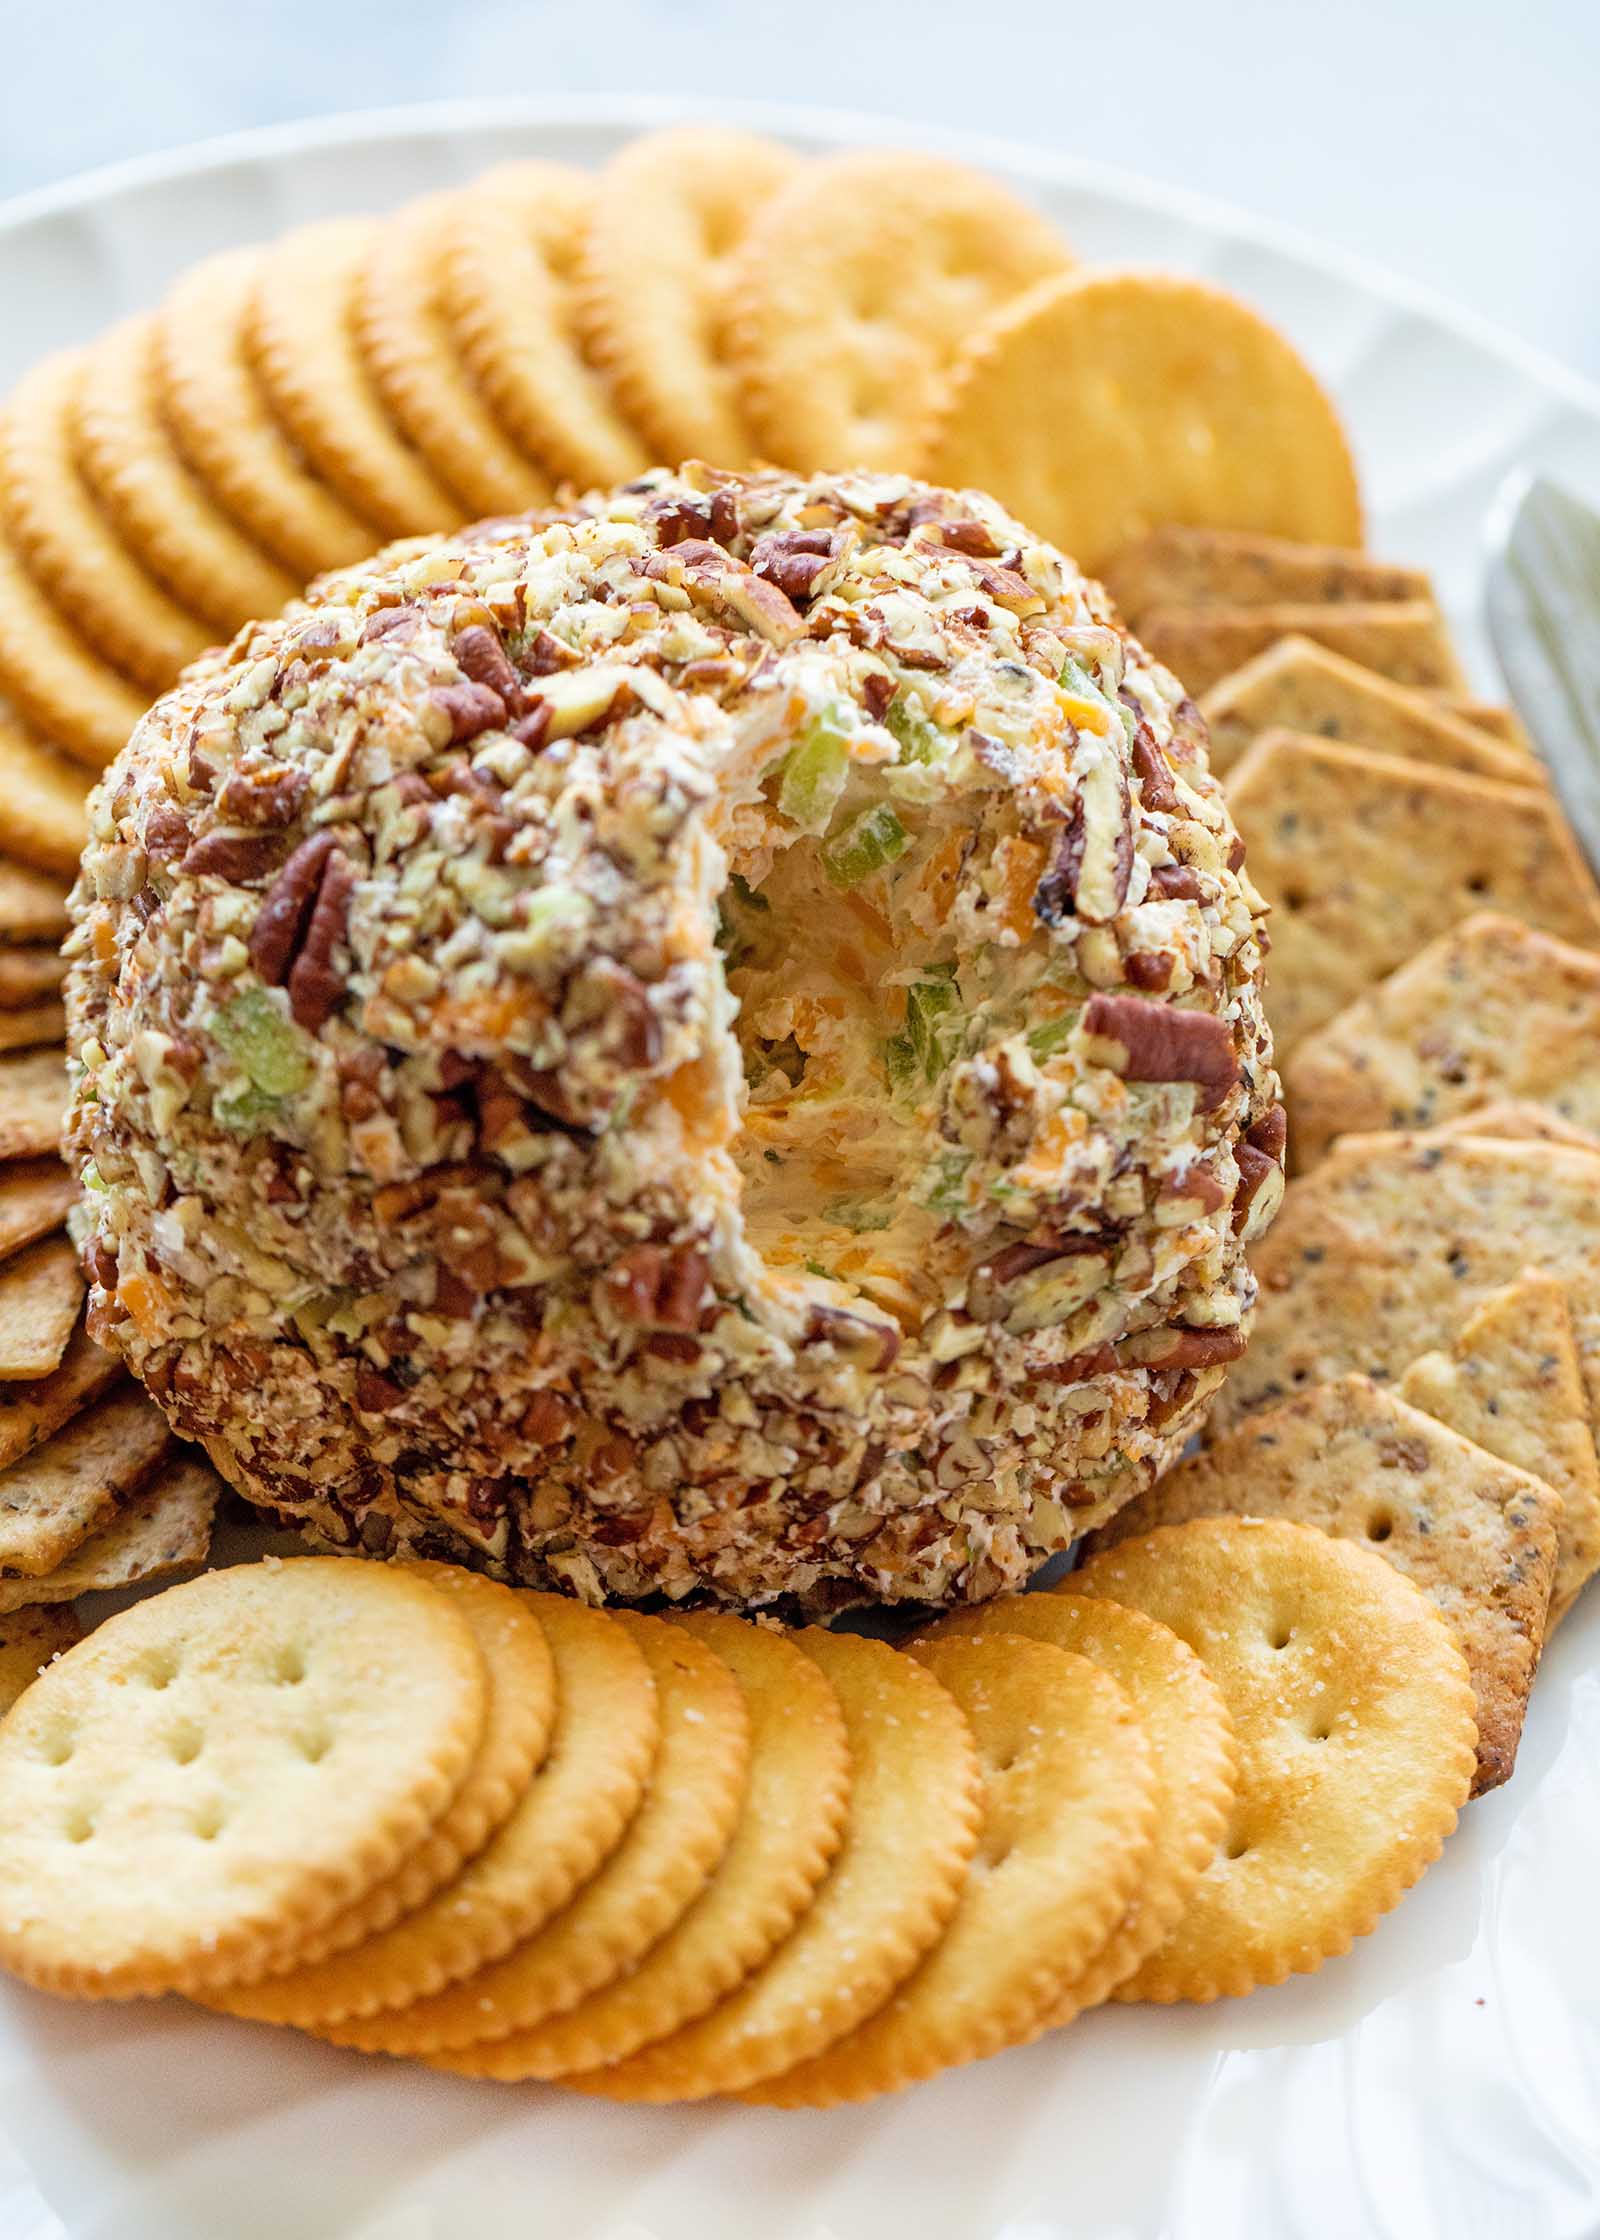 A homemade cheese ball is pictured with some scooped out. Crackers are all around the cheese ball.